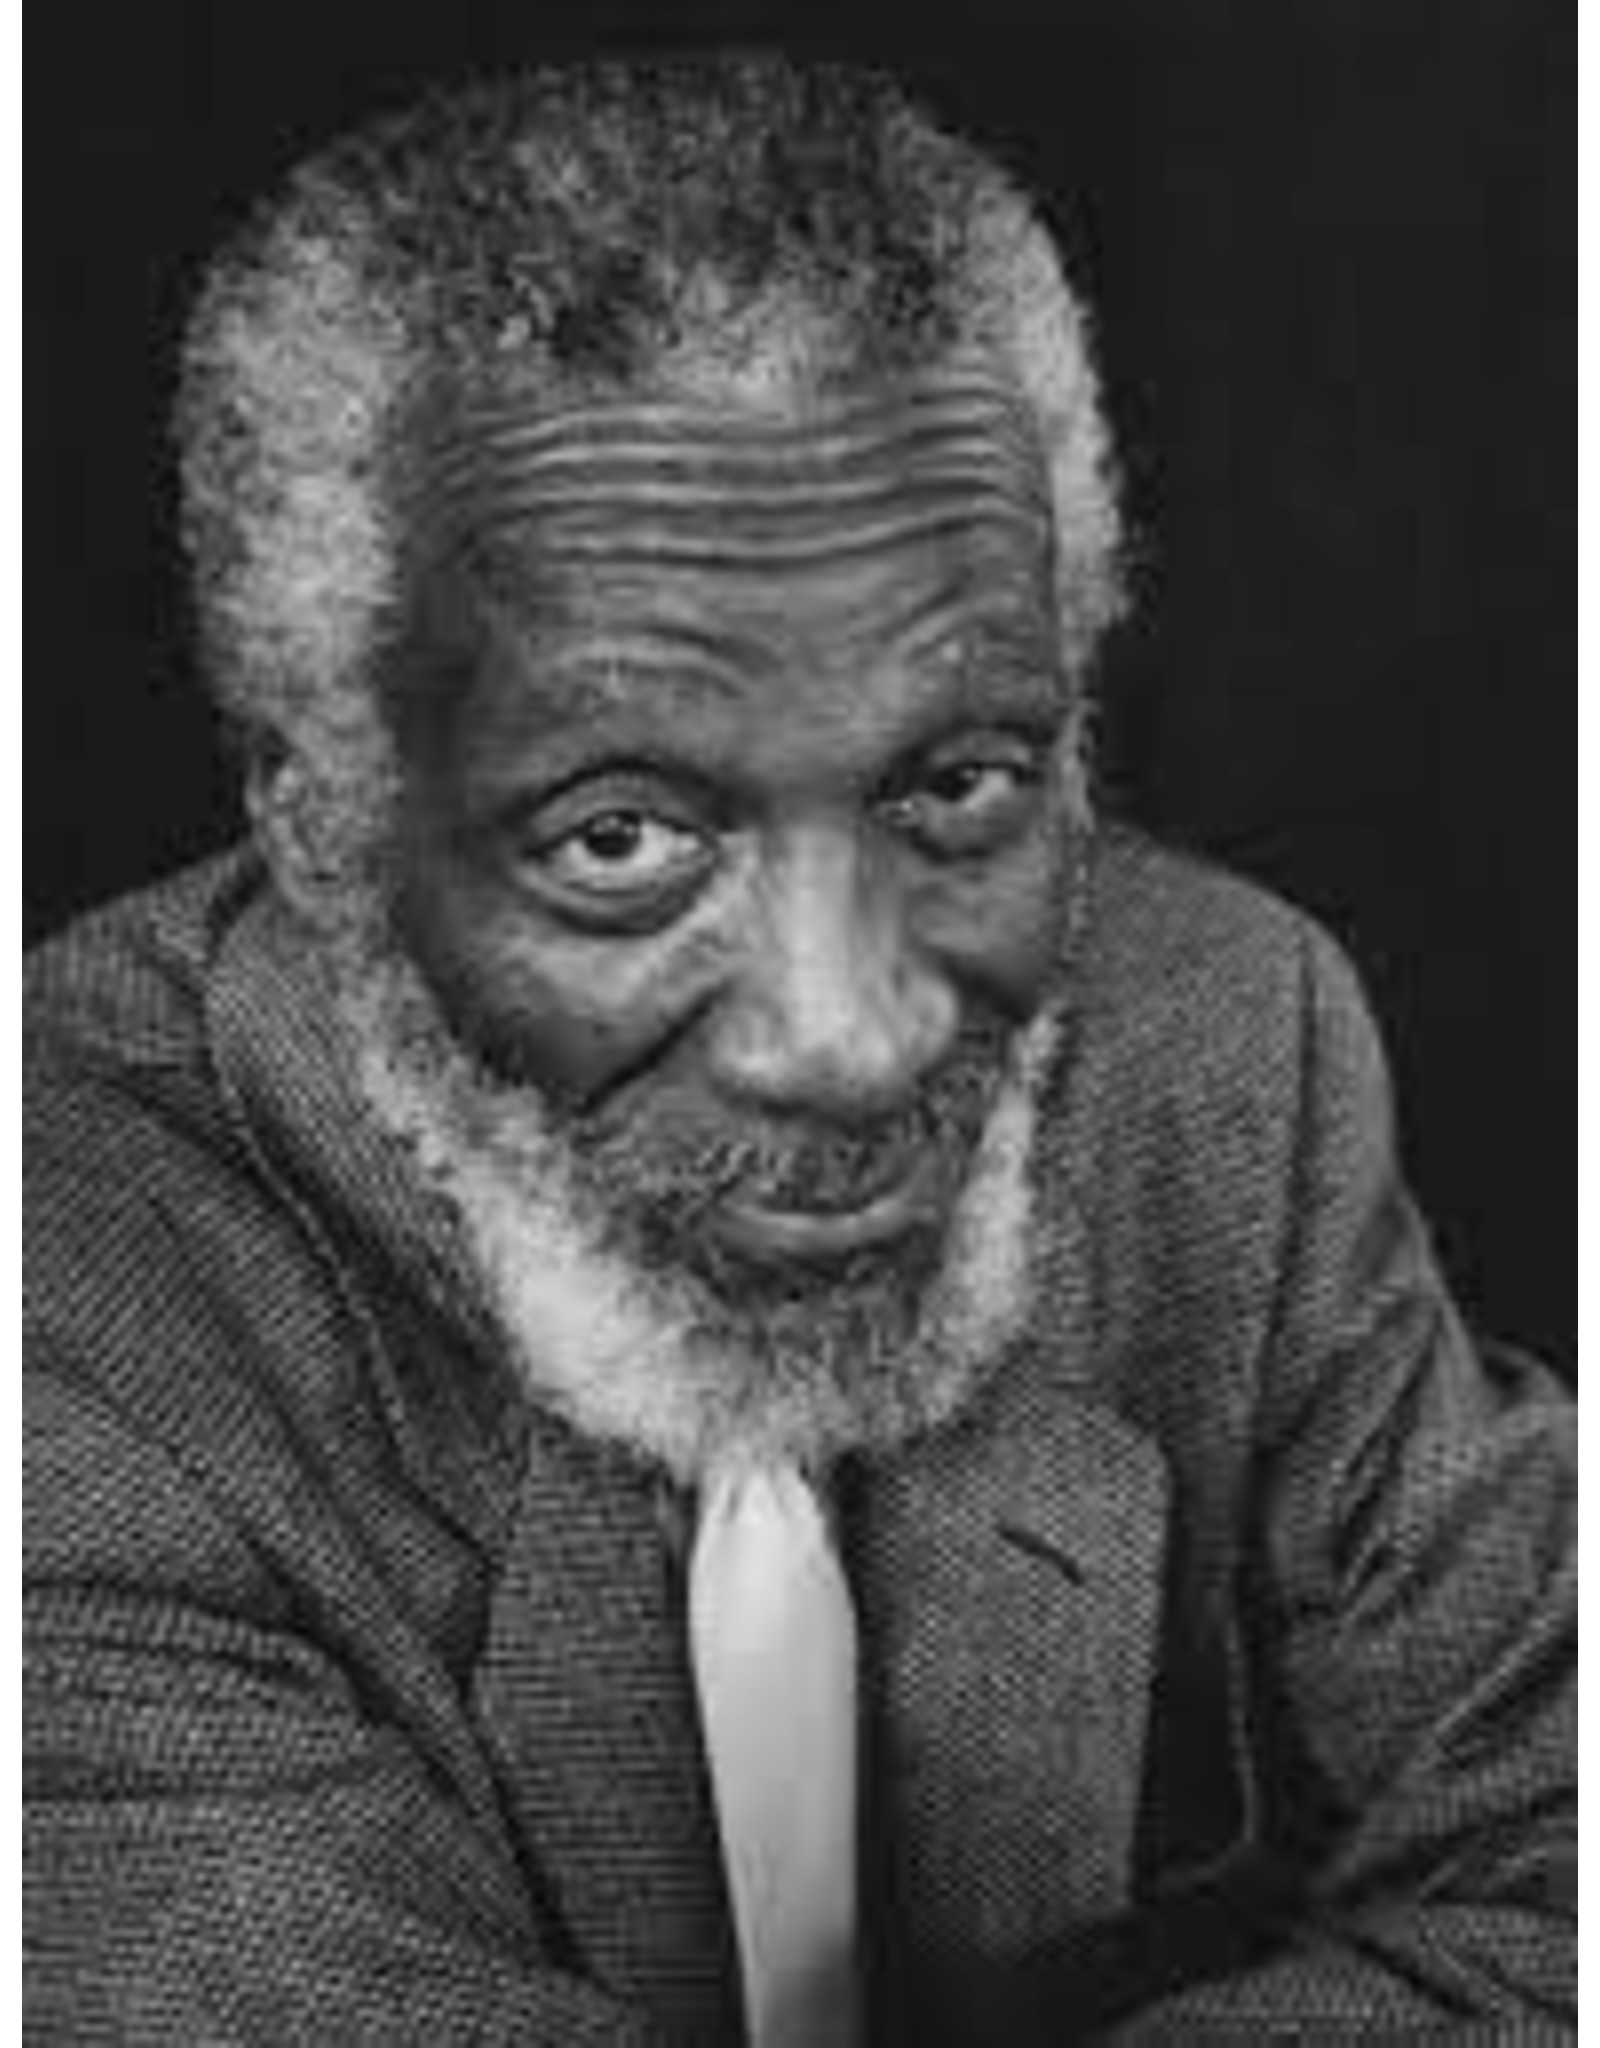 Books Dick Gregory's Natural Diet for Folks Who Eat: Cooking with Mother Nature